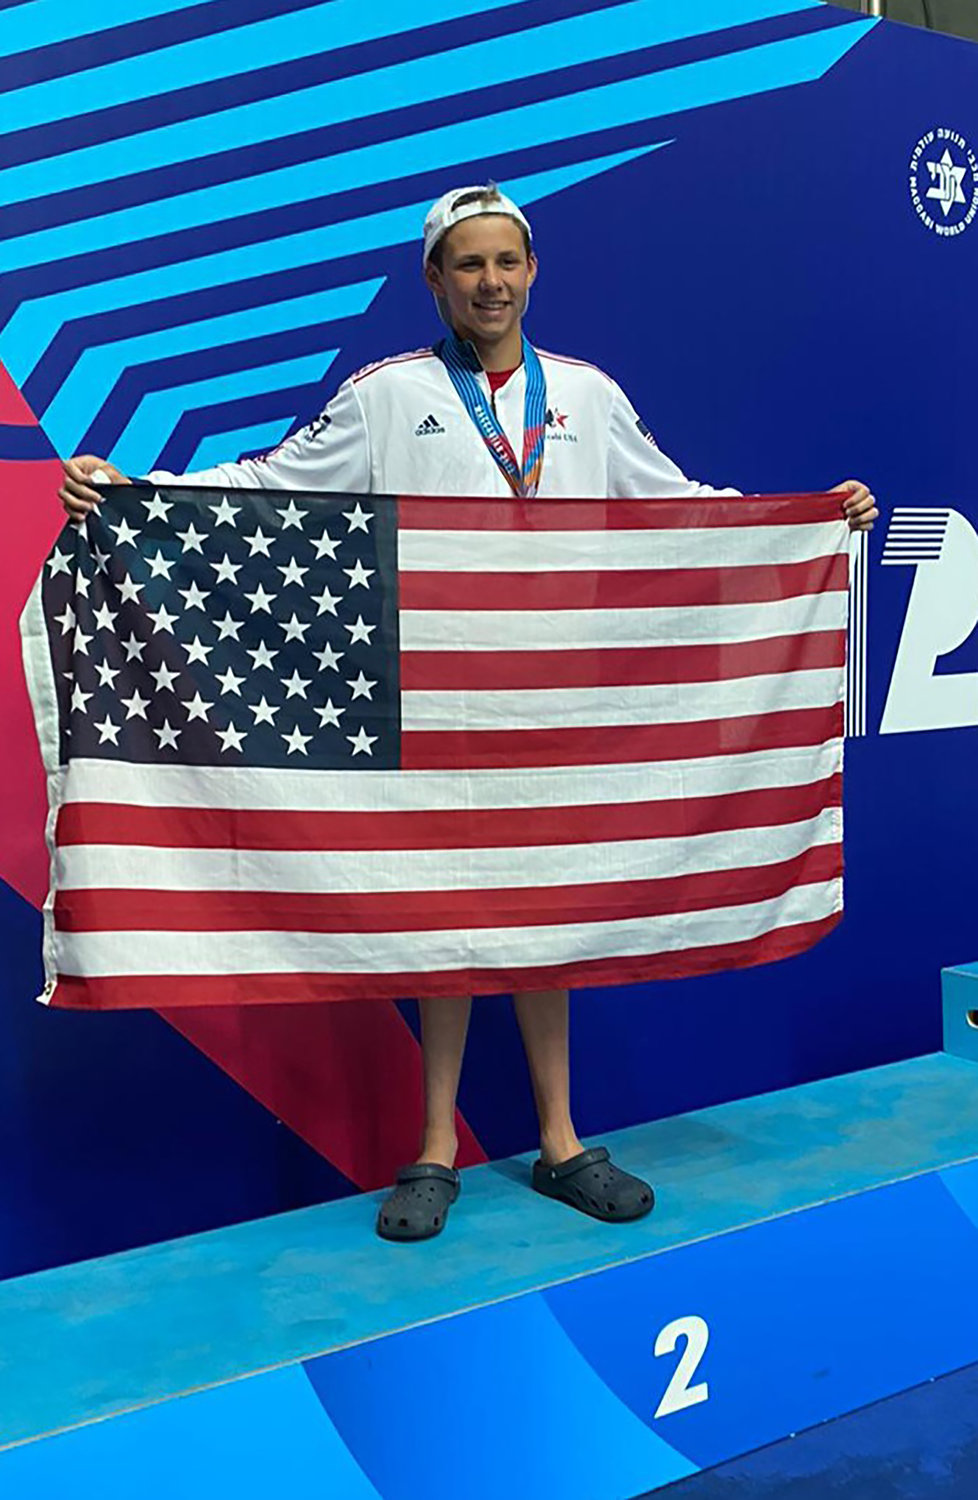 Athletes from Bellmore-Merrick recently competed in the Maccabiah Games, which ended last week in Israel. Swimmer William Siegel, a rising sophomore at Sanford H. Calhoun High School, won a gold medal in the boys’ 1,500-meter freestyle.